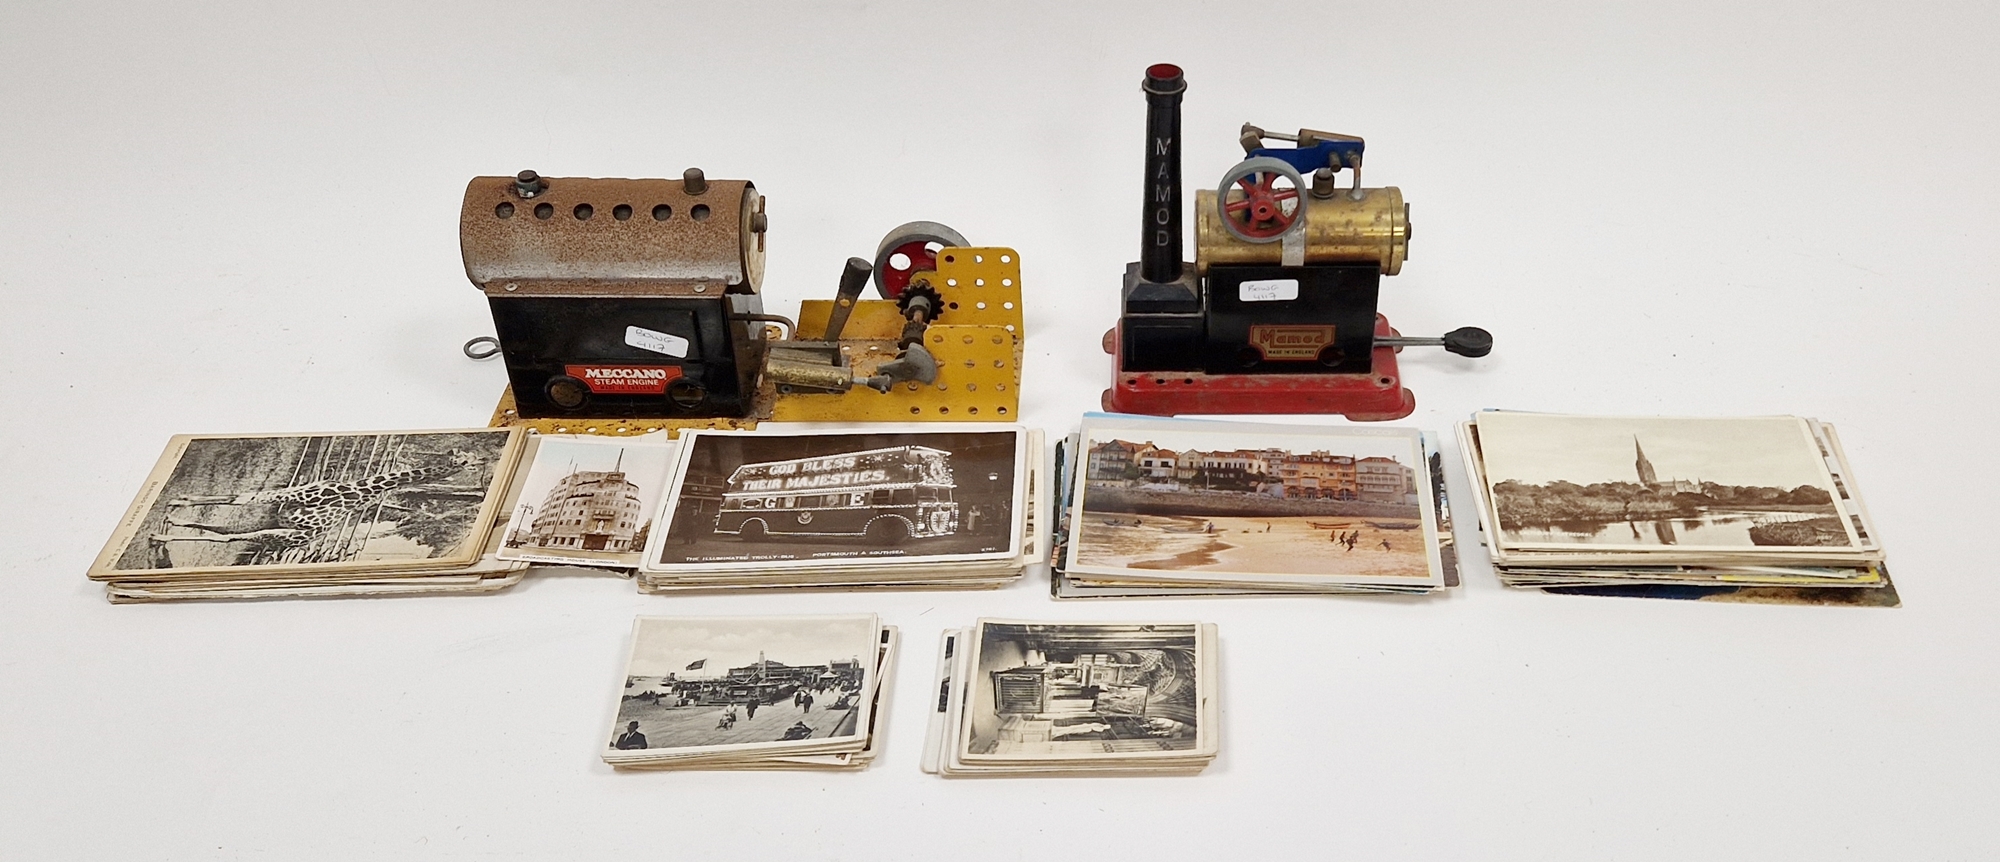 Mamod stationary steam engine with burner, a Meccano steam engine and a collection of postcards - Image 2 of 2